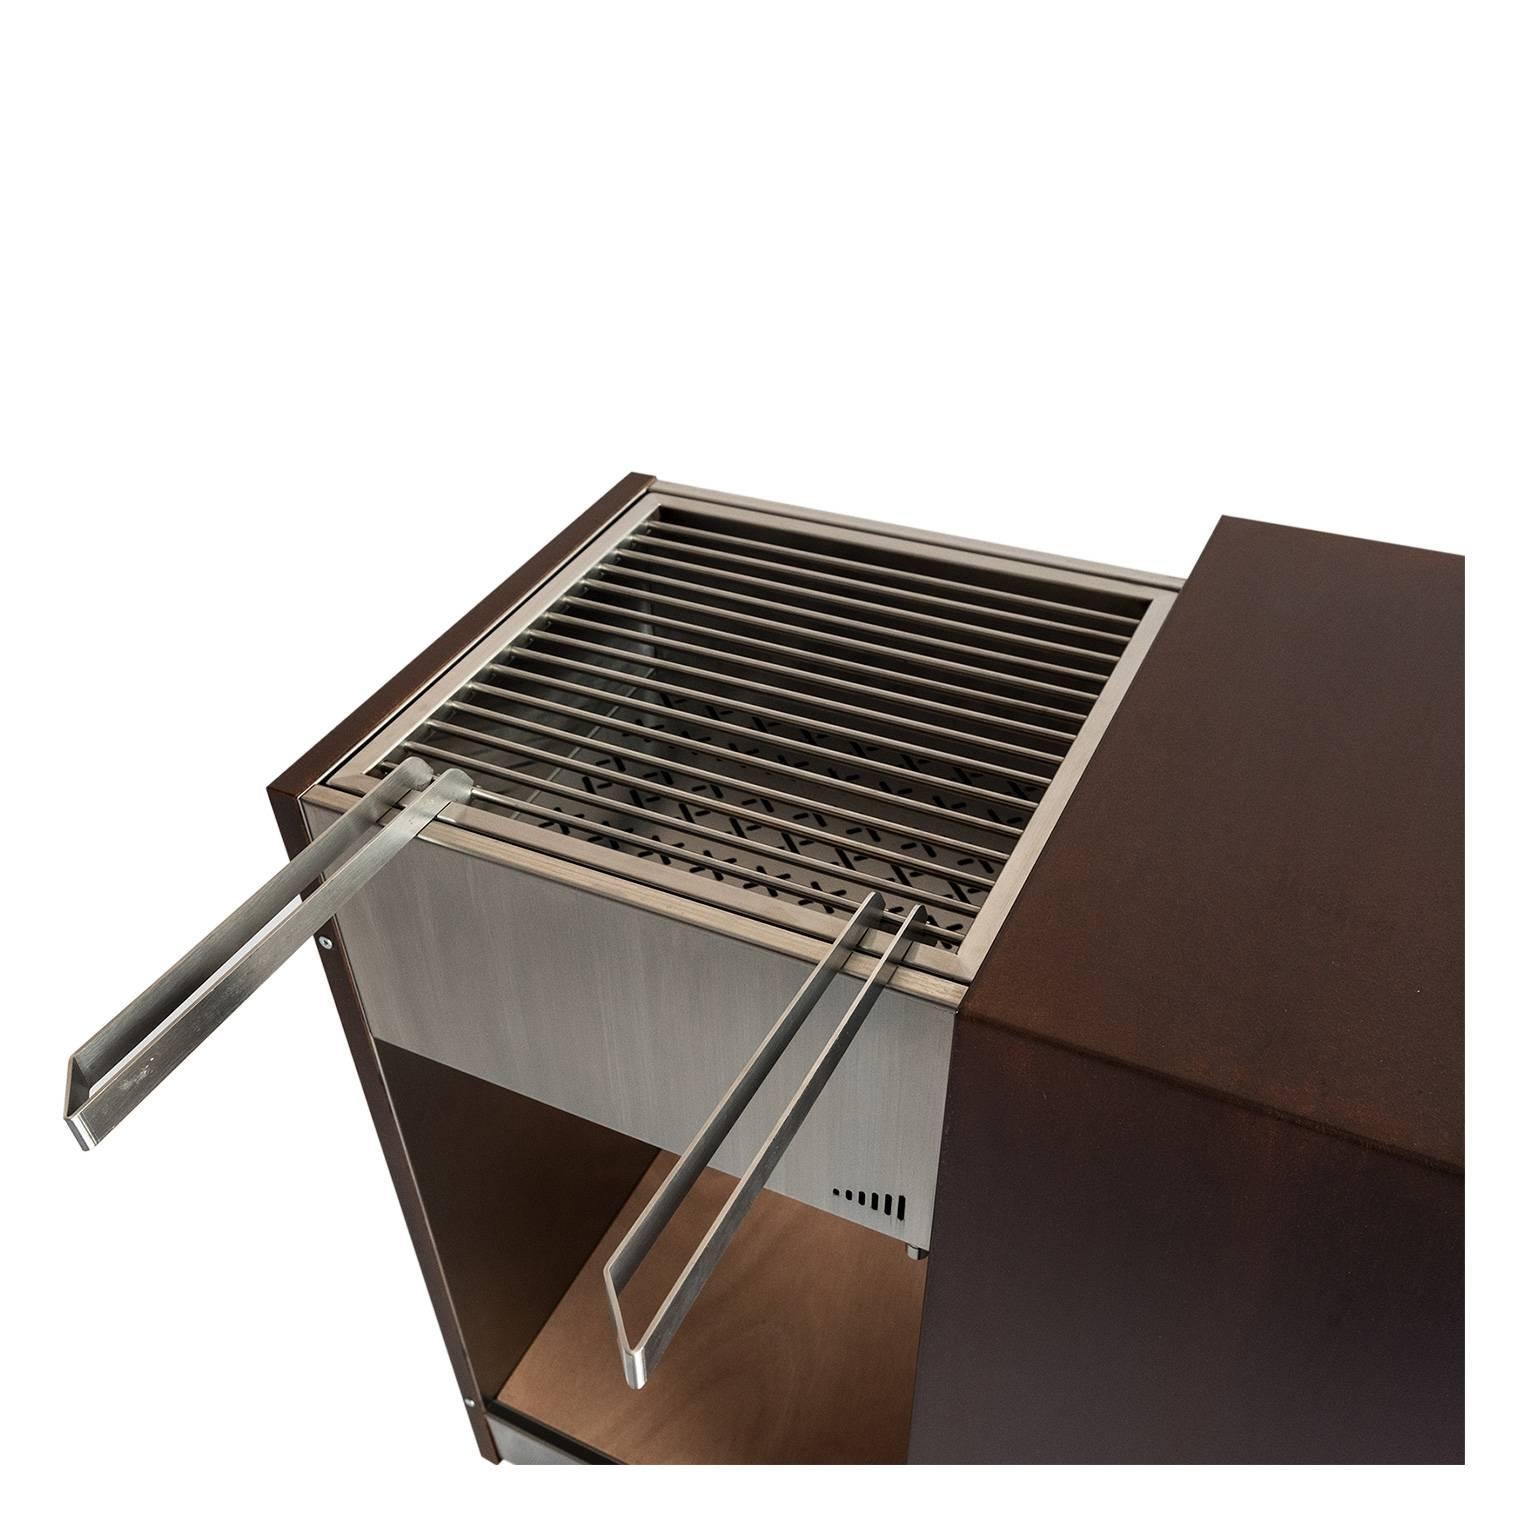 Contemporary Compact Garden Charcoal Barbecue with sliding grills, Snail Mono (Italienisch) im Angebot